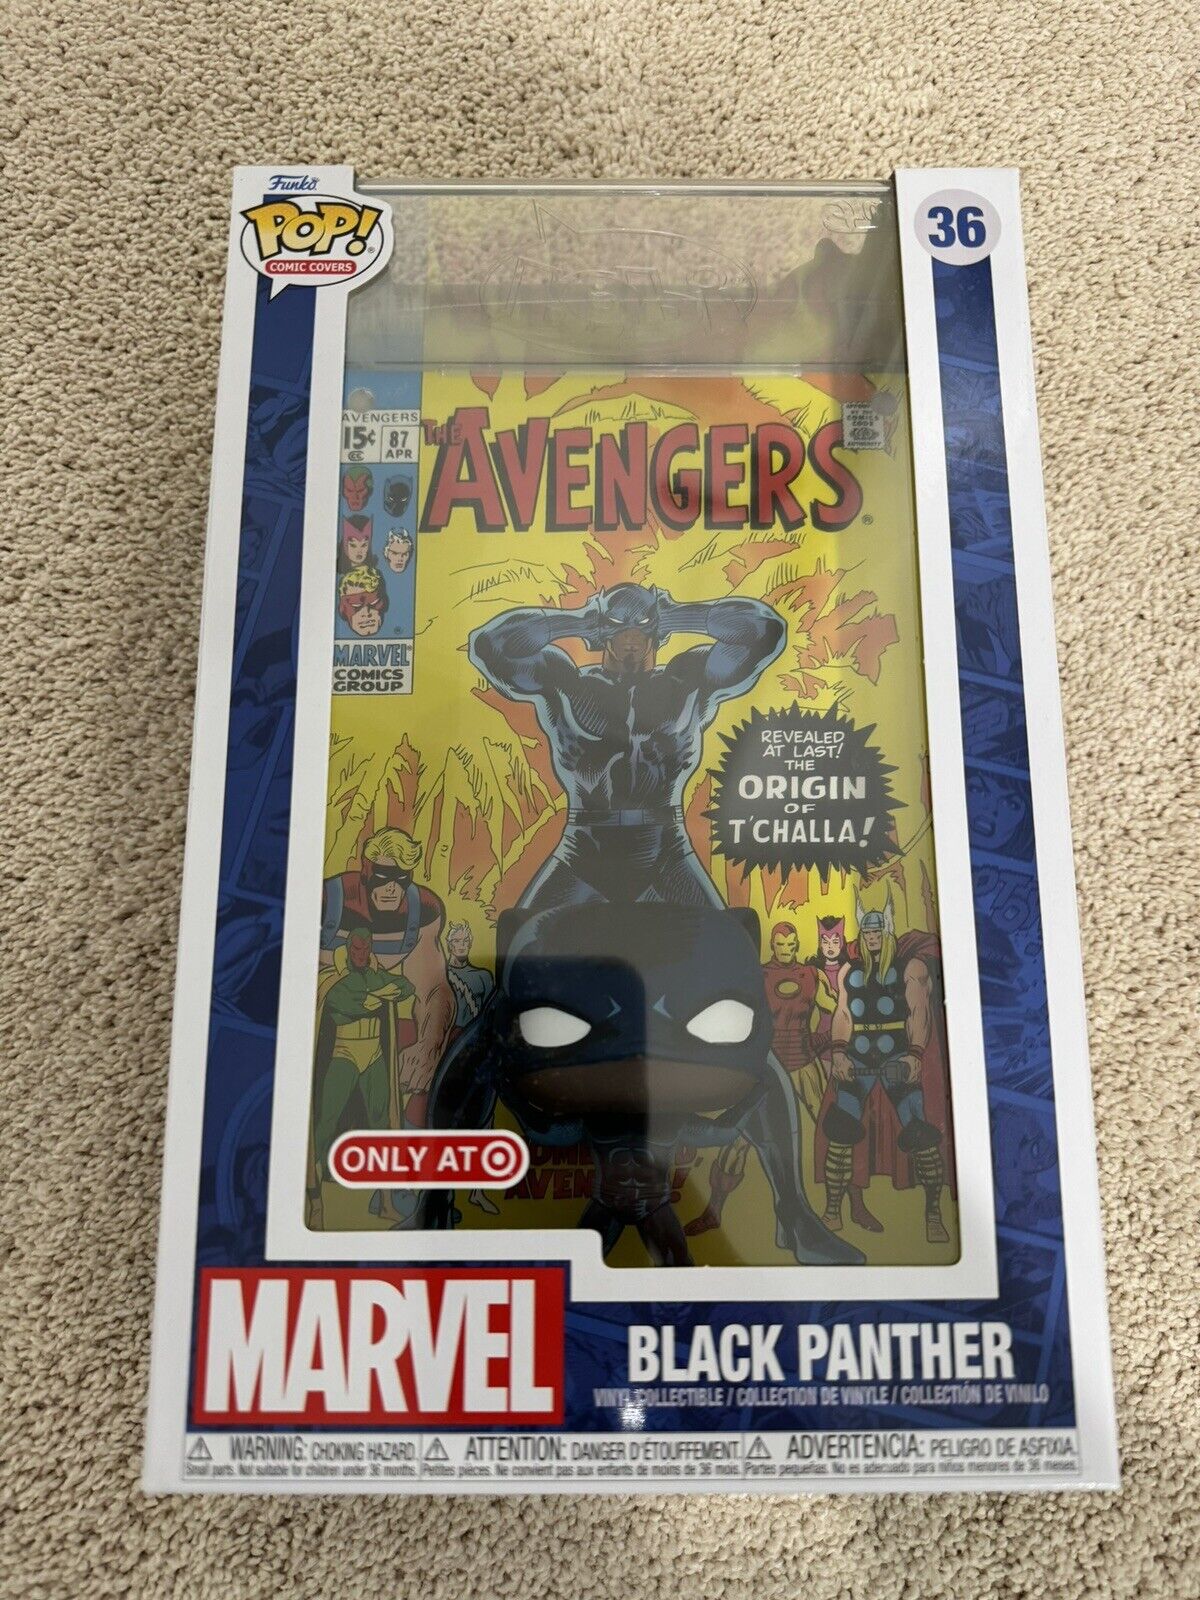 Funko POP Comic Cover: Marvel - Black Panther #36 / Avengers Special Edition